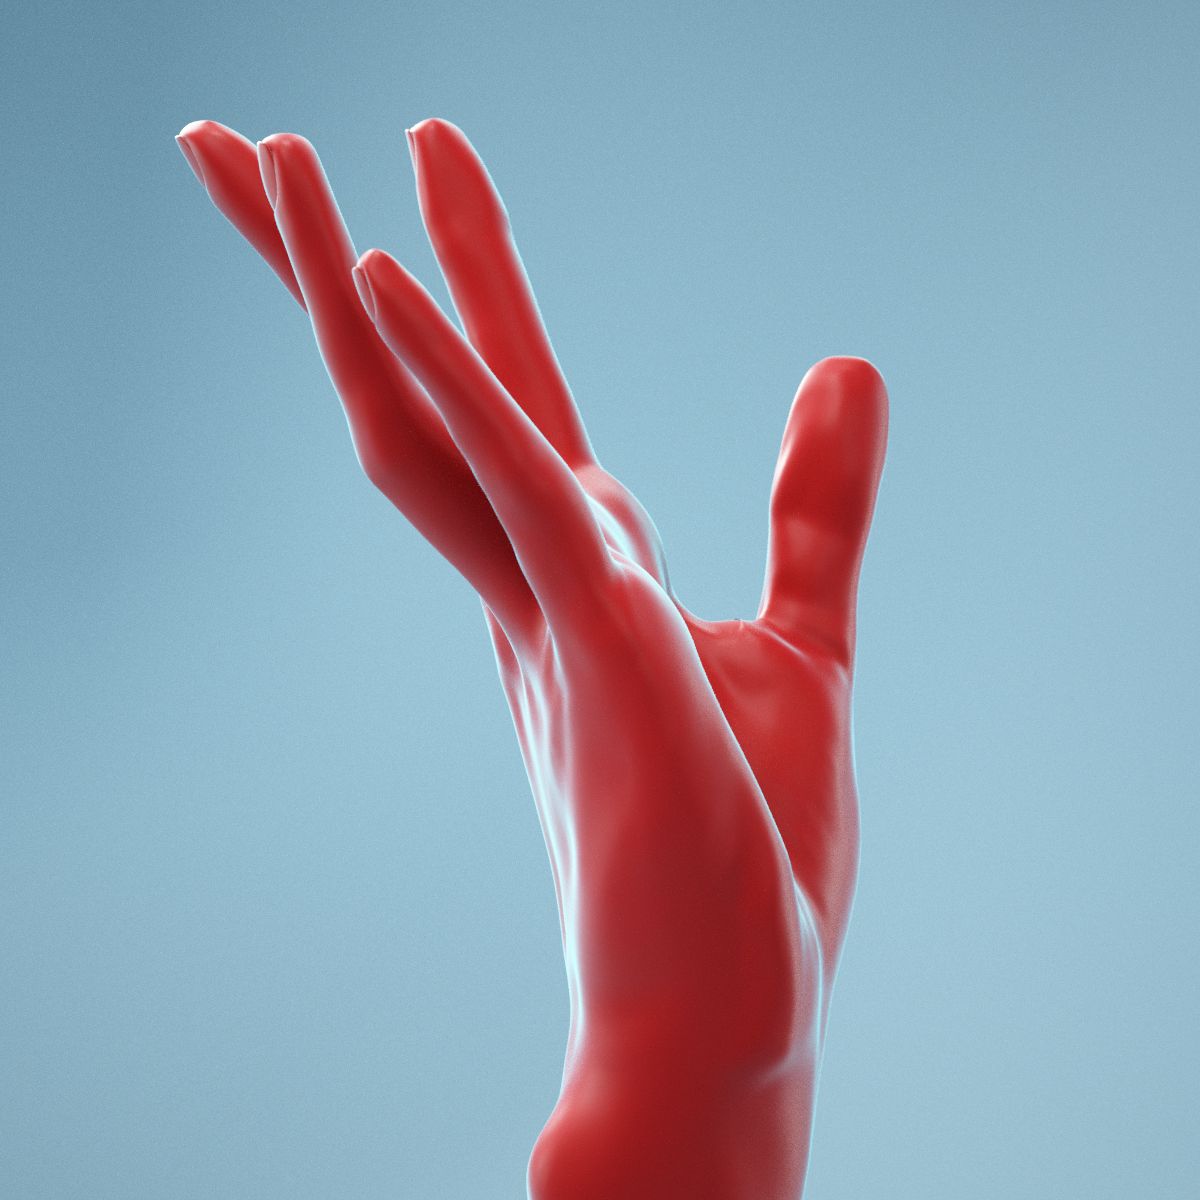 Stretched Backwards Realistic Hand